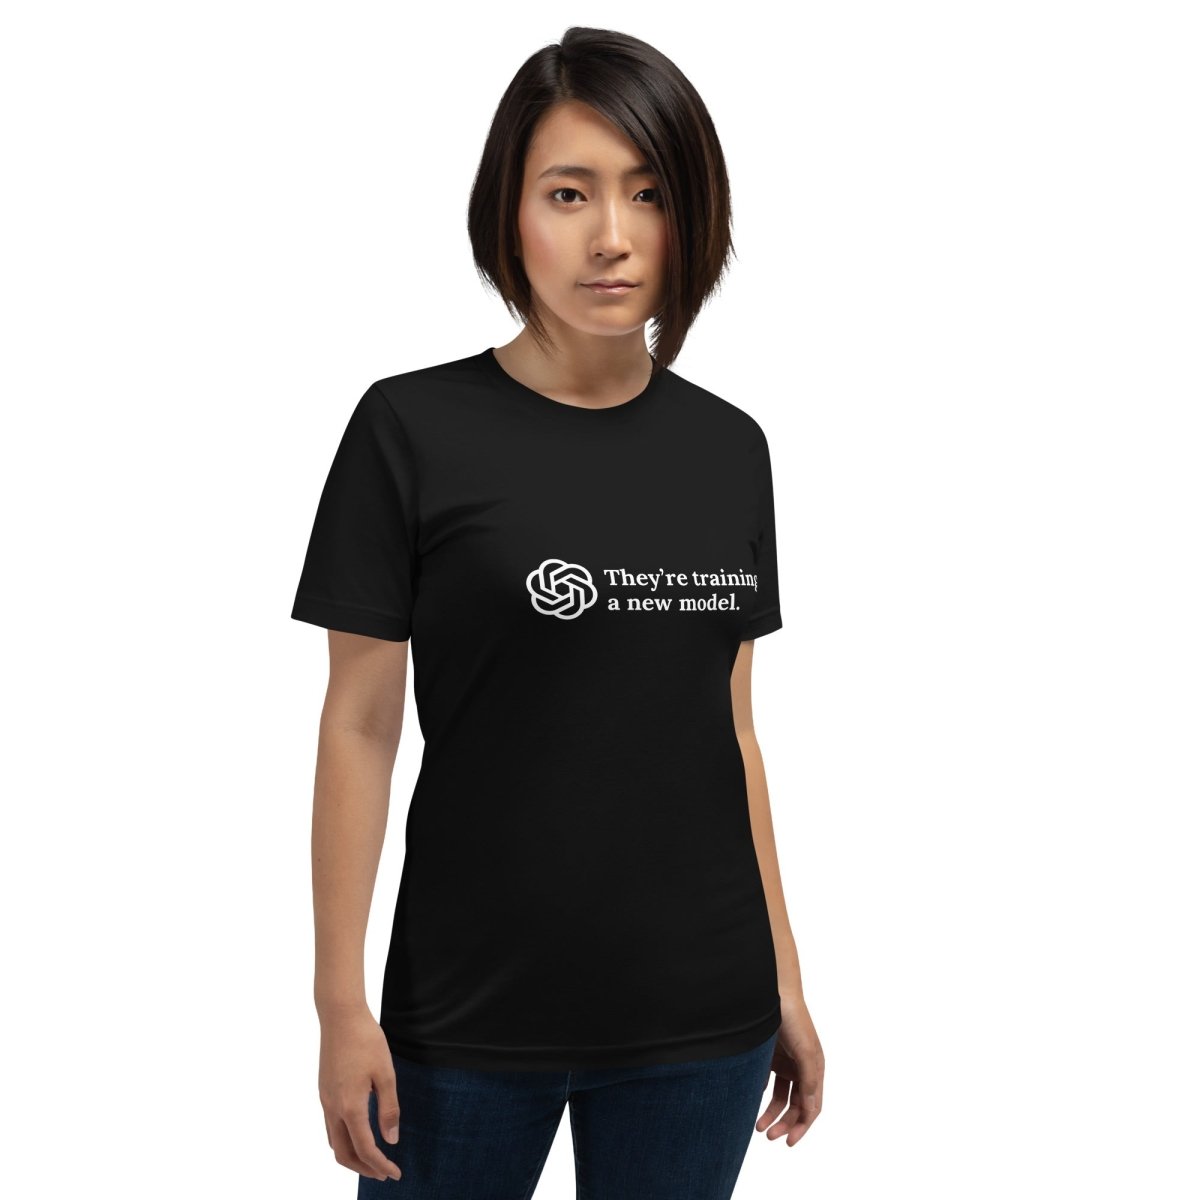 They're training a new model. T - Shirt (unisex) - Black - AI Store